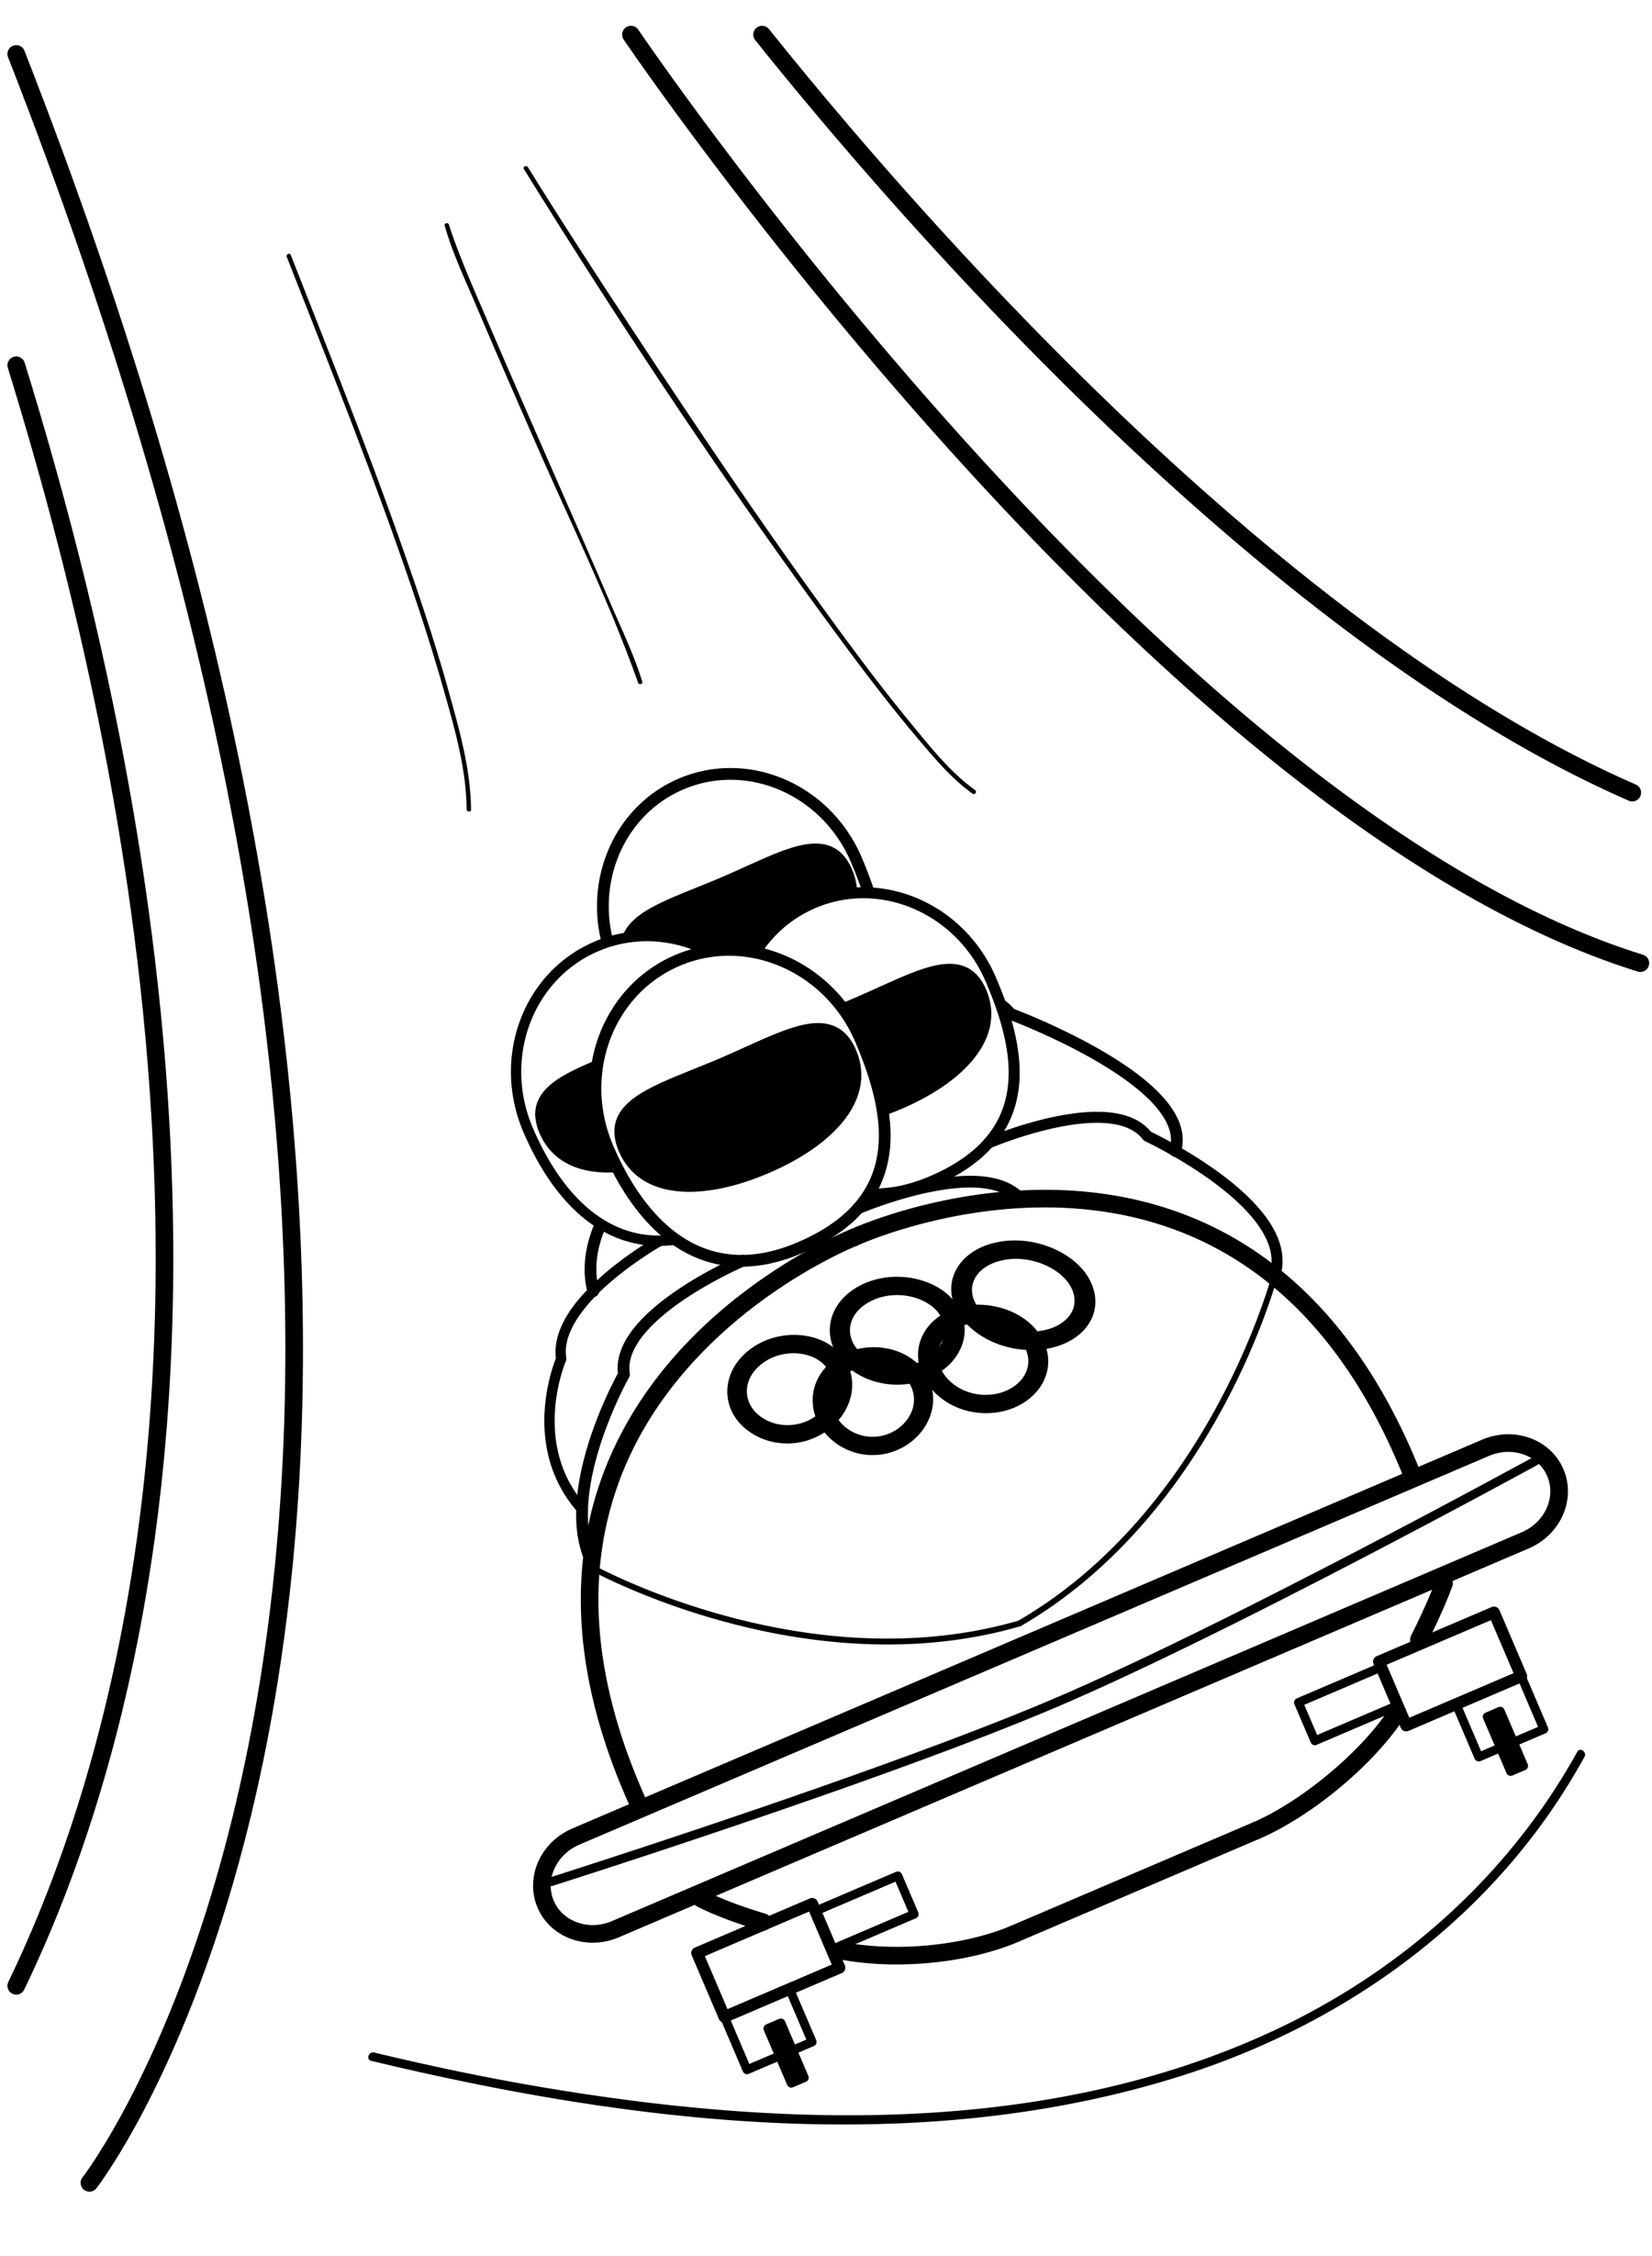 Bobsleigh coloring page